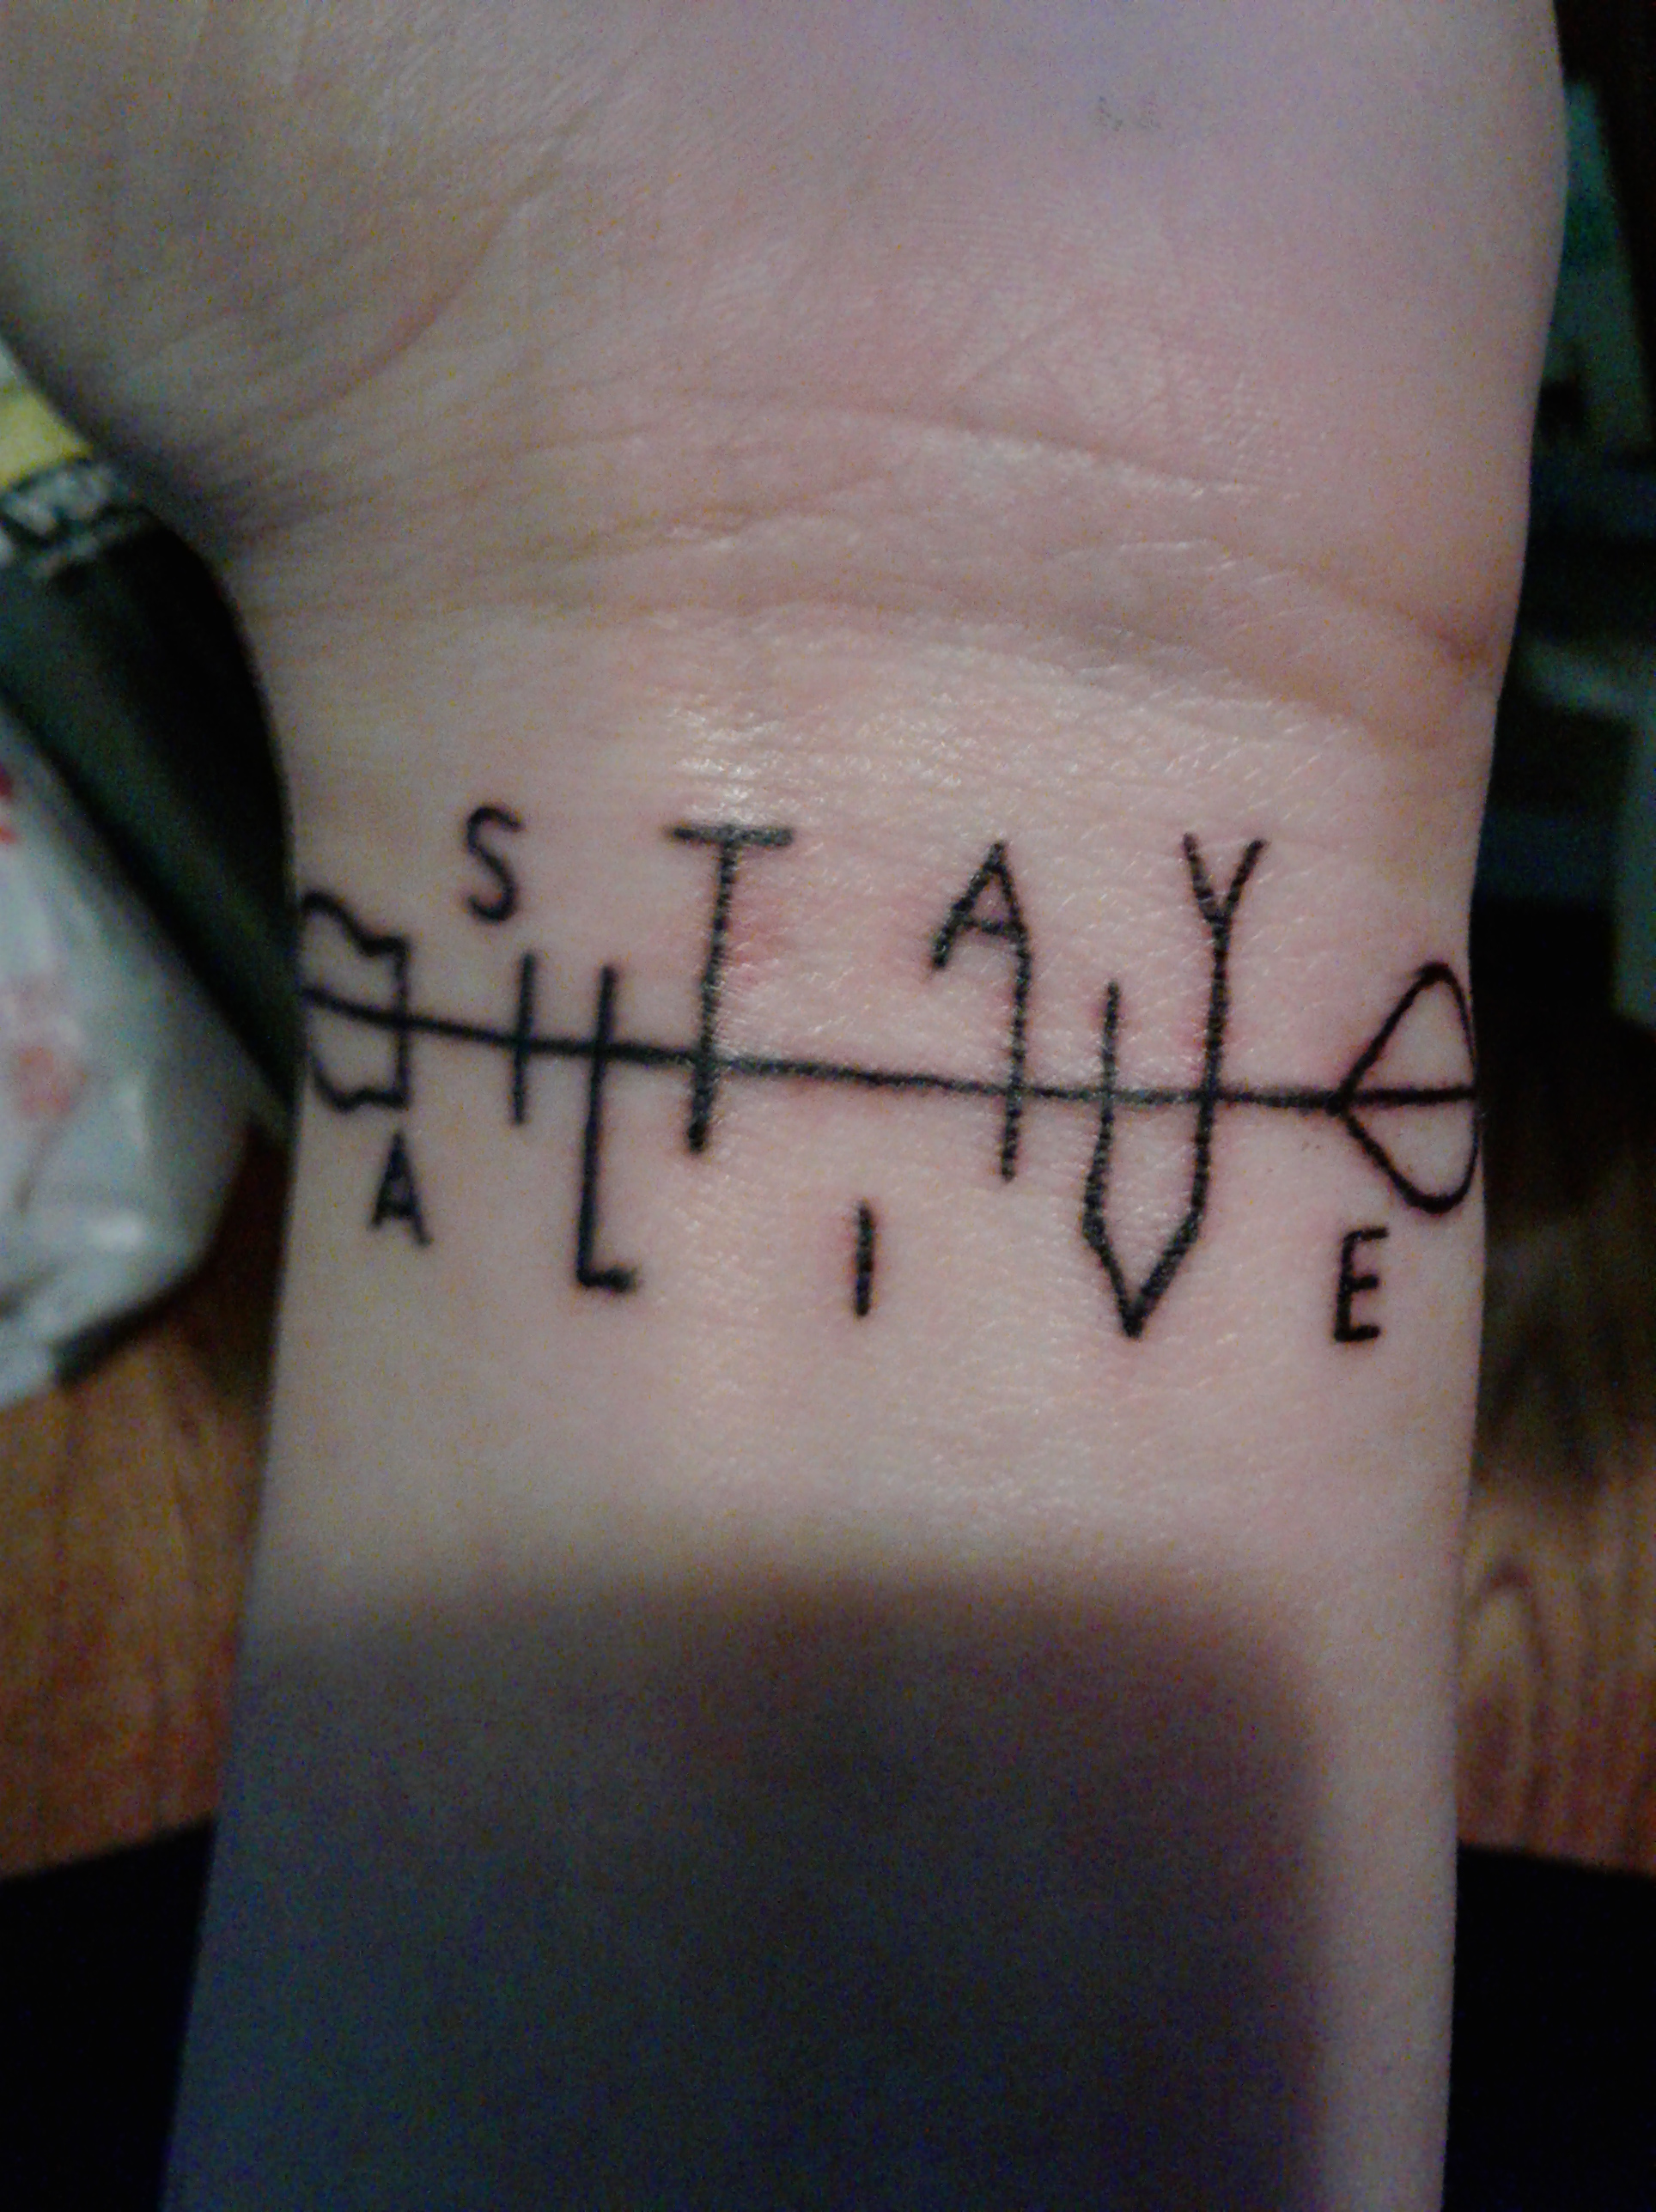 Share 122+ stay alive tattoo super hot